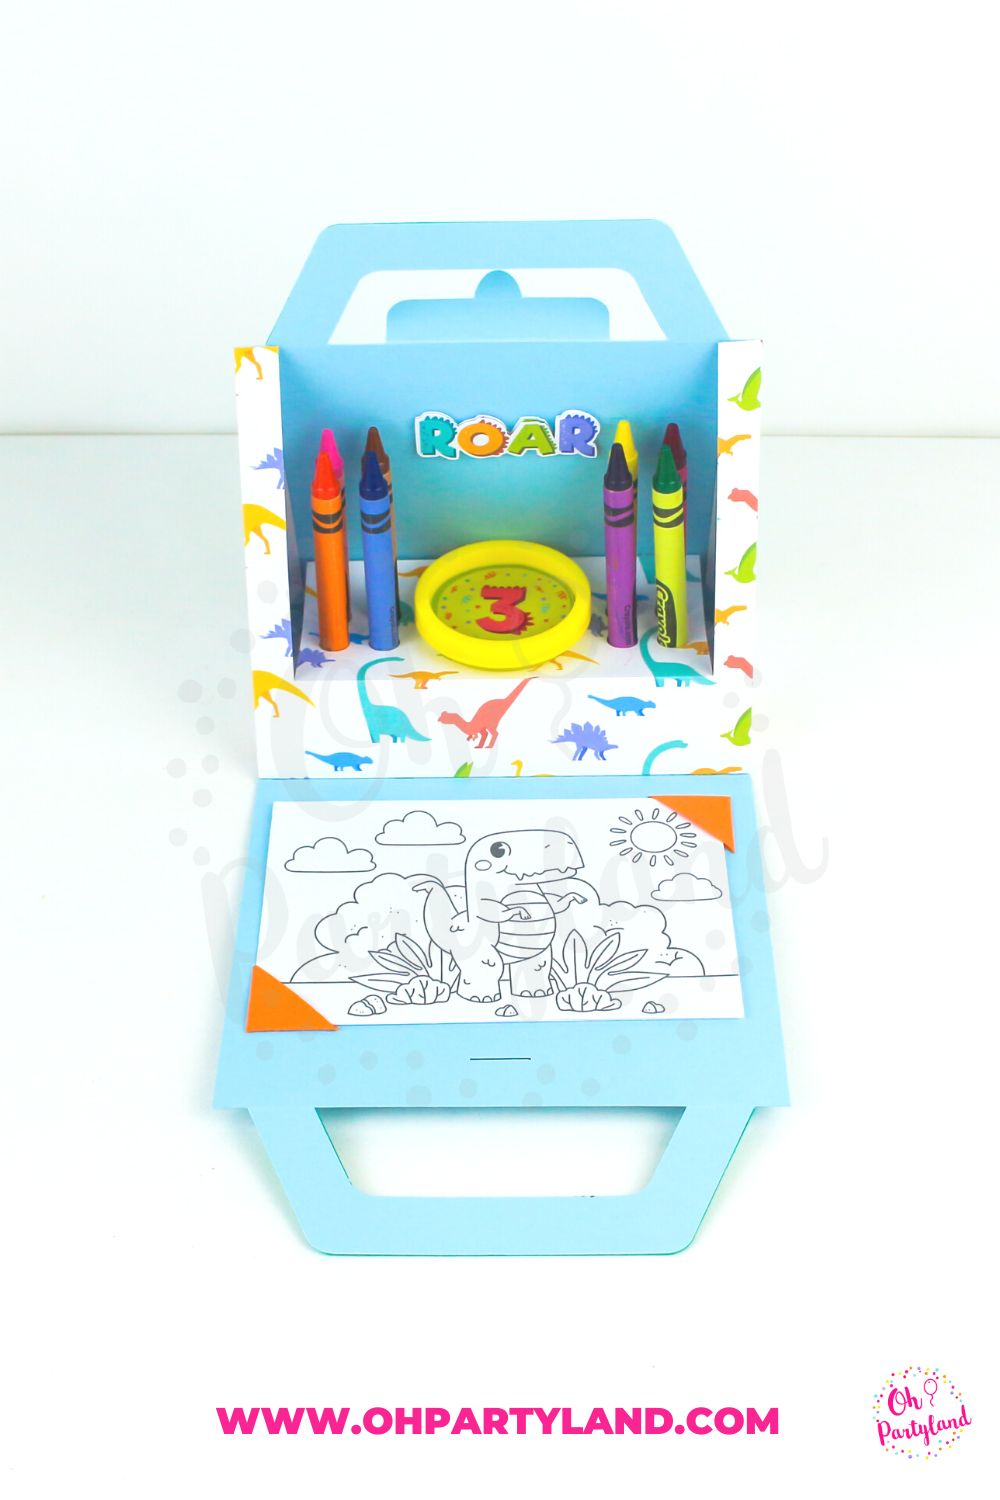 play doh and crayon box template